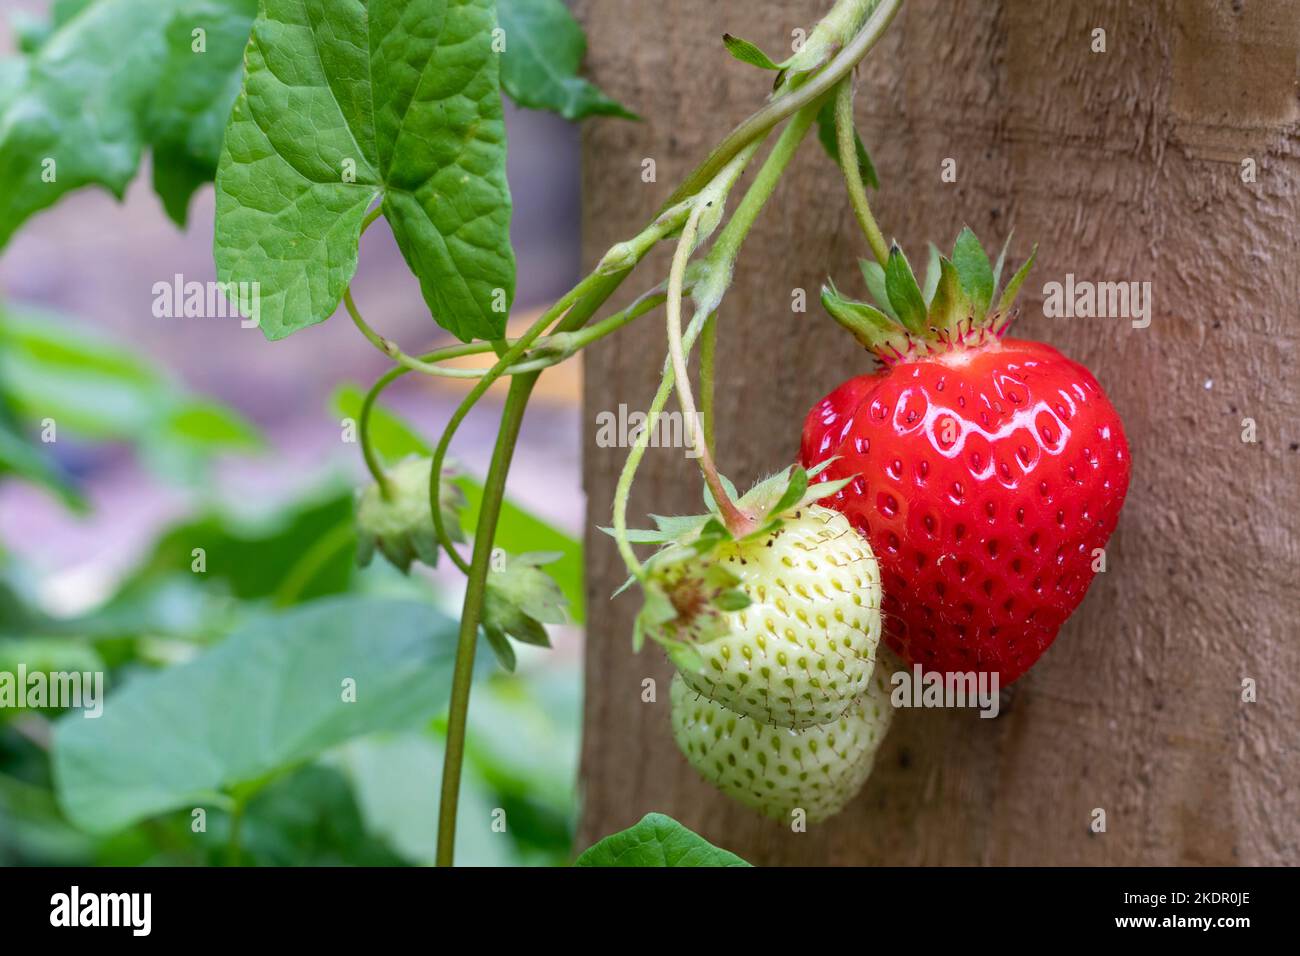 Strawberries growing outside in a garden planter, Sussex, UK Stock Photo